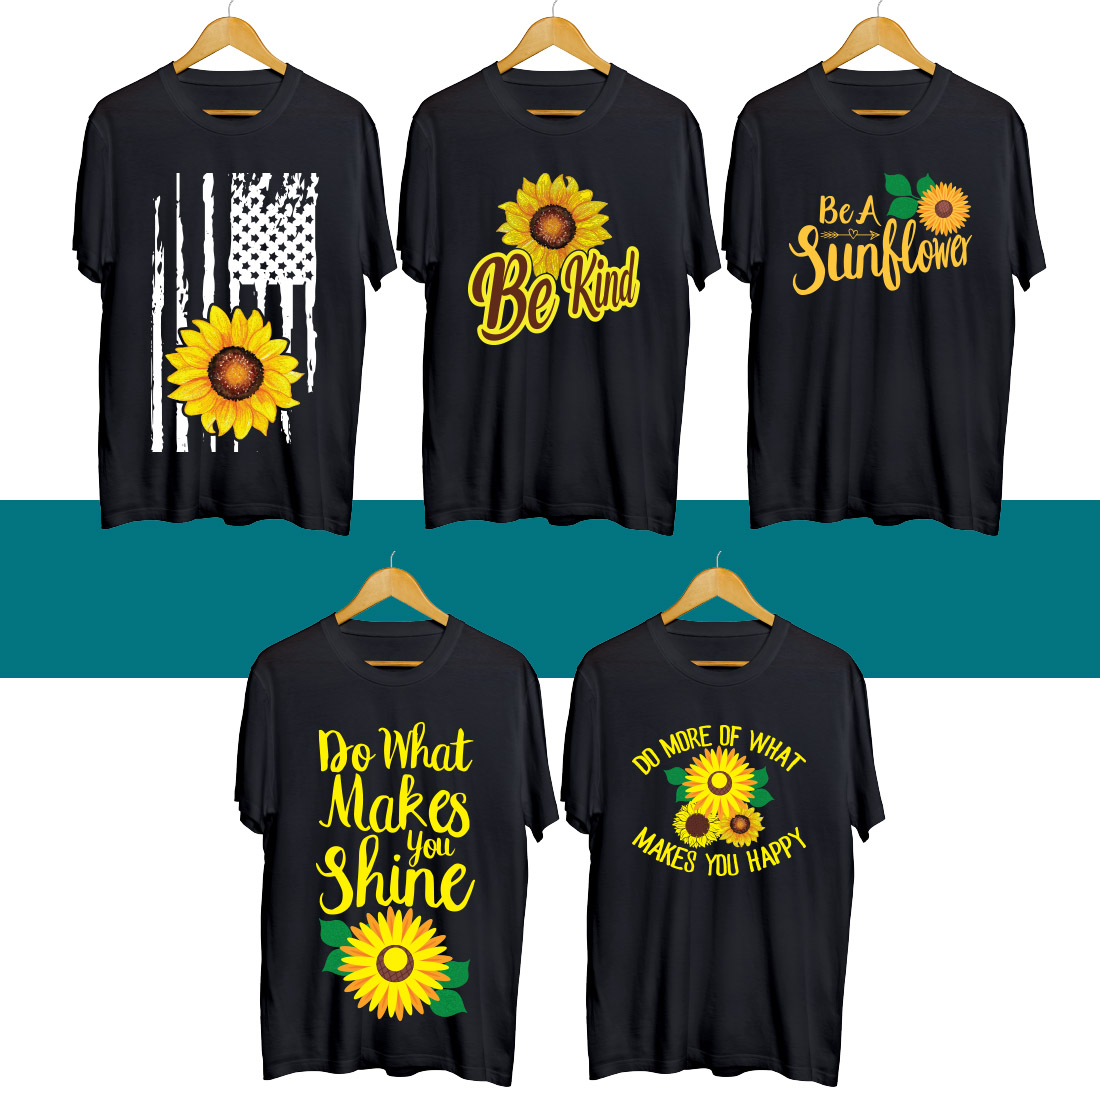 Four shirts with sunflowers on them on a hanger.